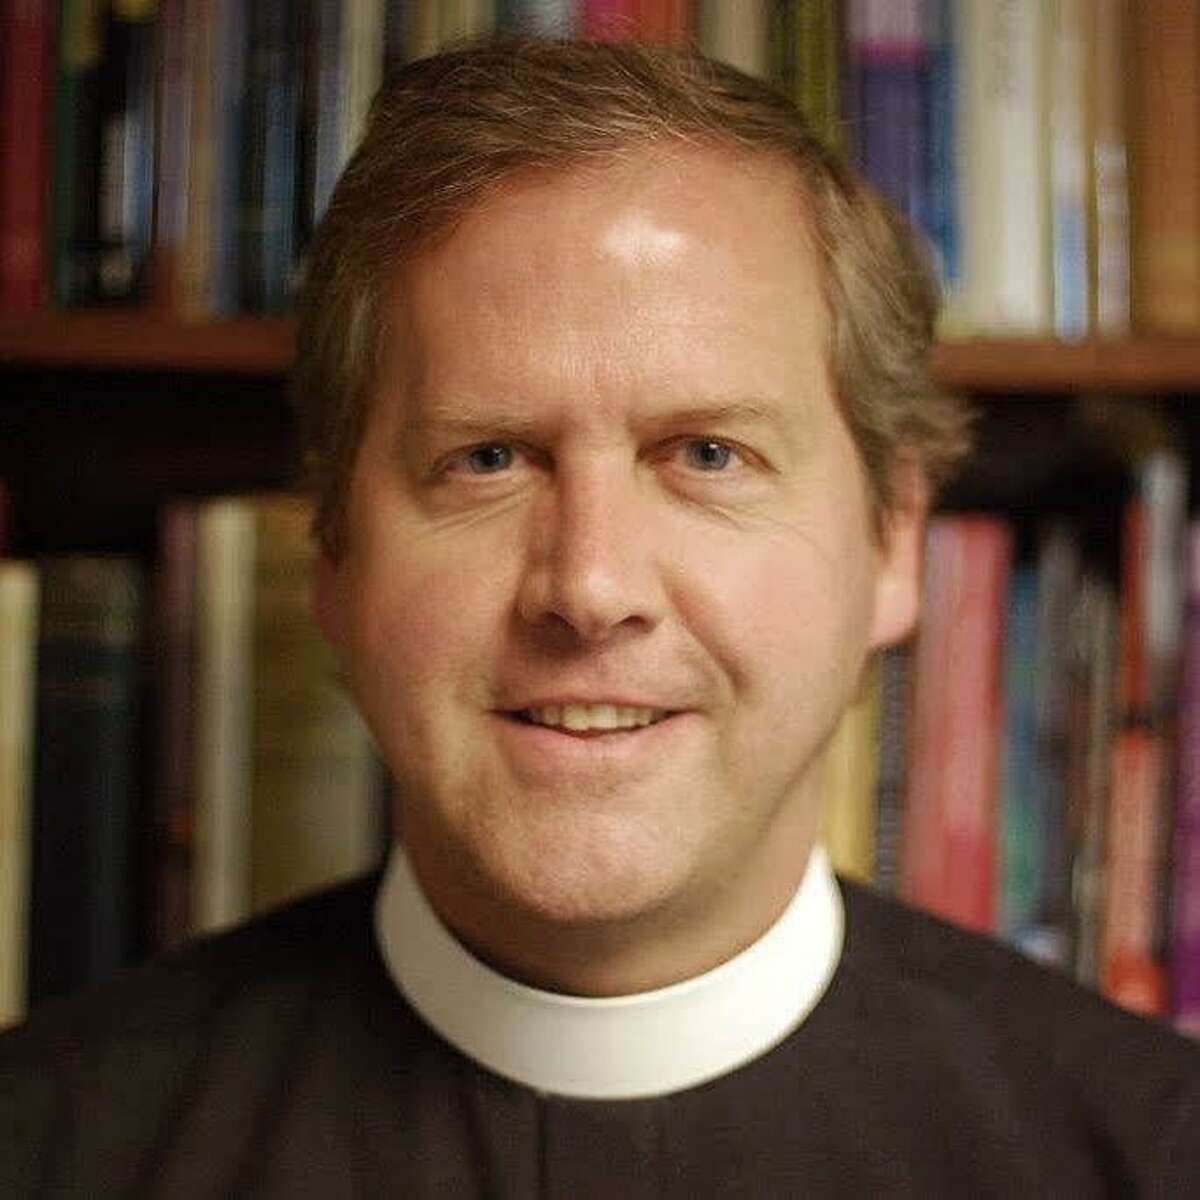 The Rev. Marek Zabriskie will become the new rector of historic Christ Church Greenwich in November.